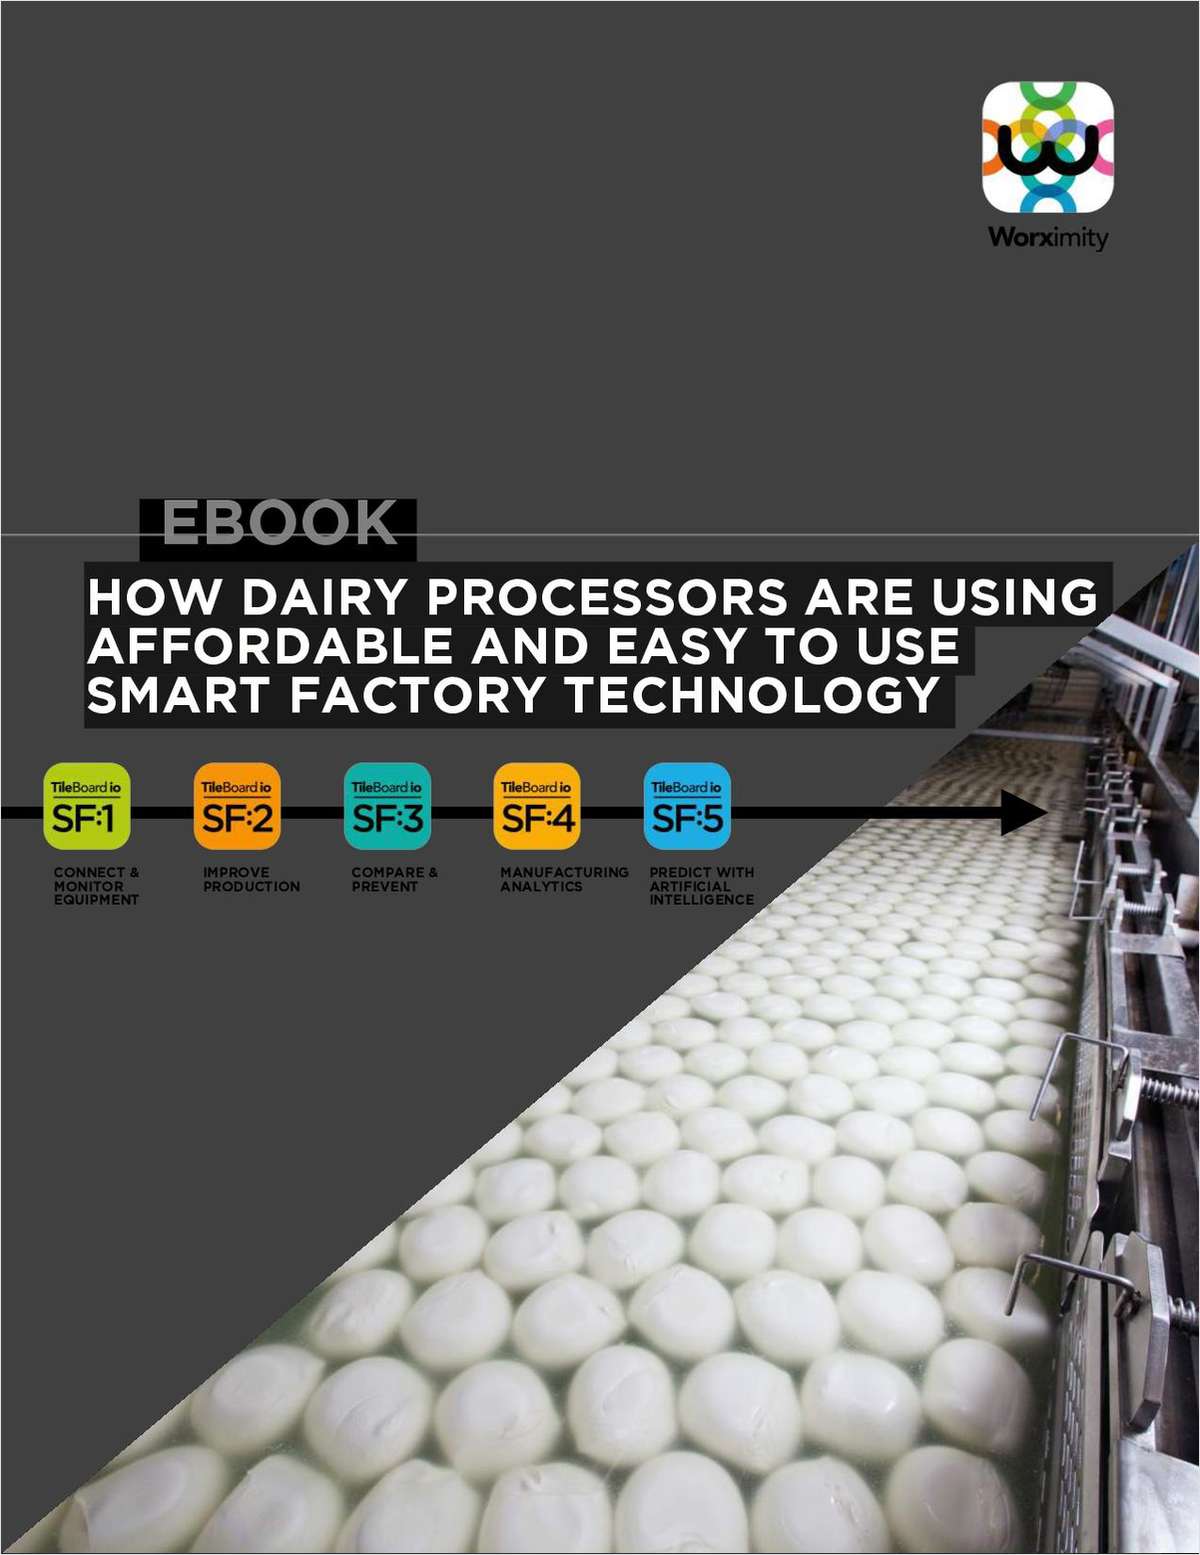 How Dairy Processors Are Using Affordable and Easy to Use Smart Factory Technology